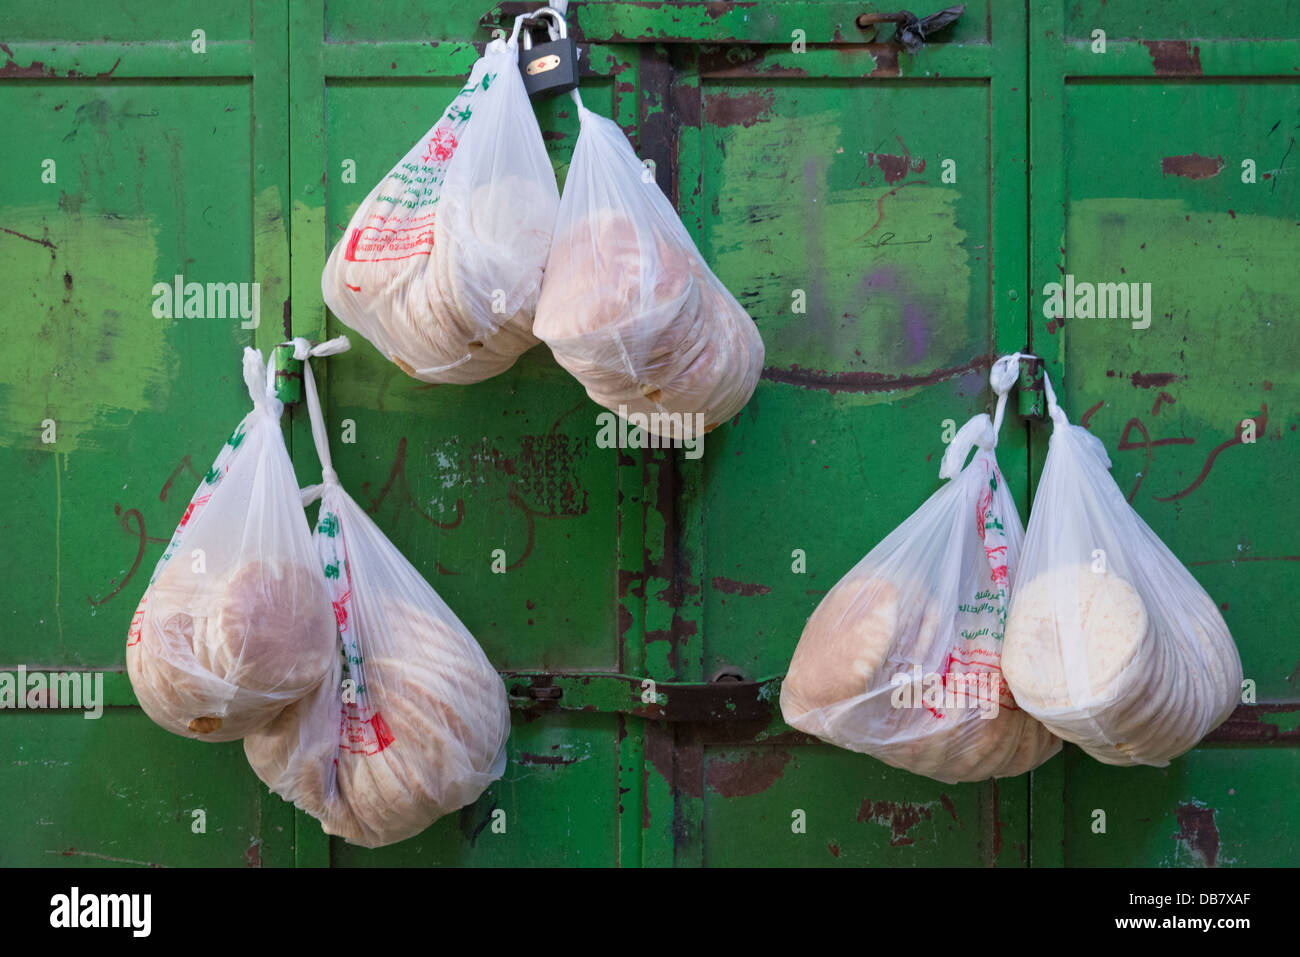 Pita bread in plastic bags hanging on the shutters of a closed restaurant. Jerusalem Old City. Israel. Stock Photo